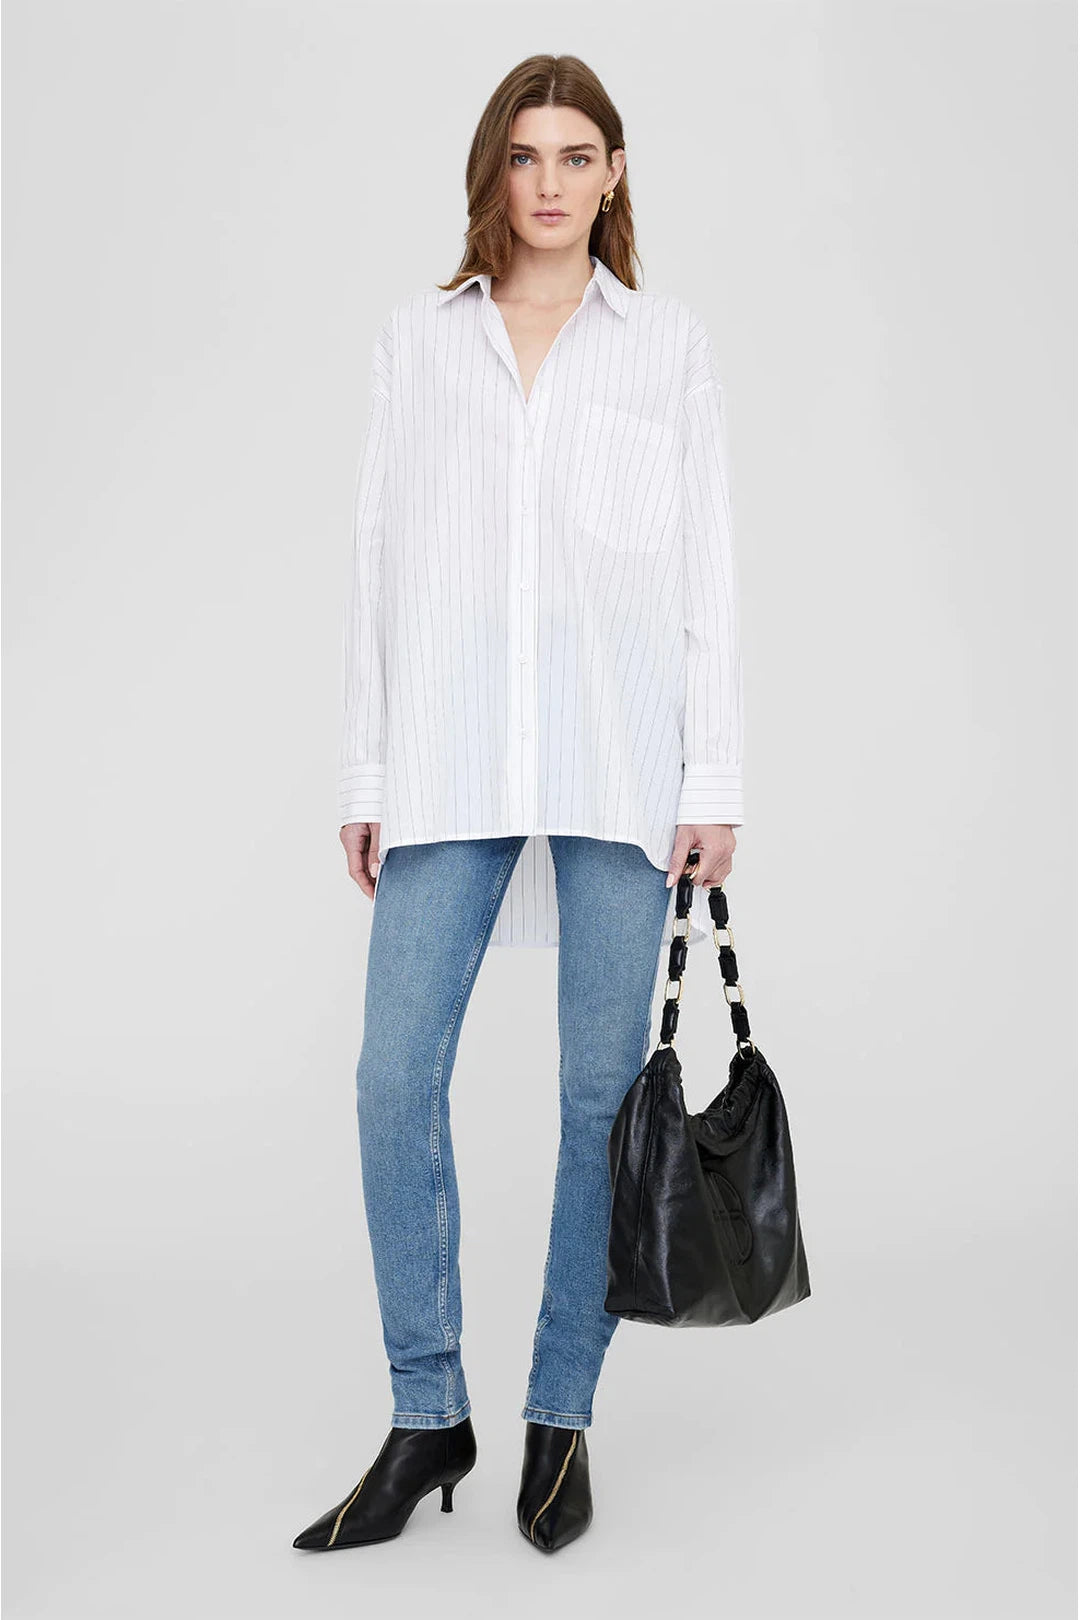 Chrissy shirt, white and taupe stripe